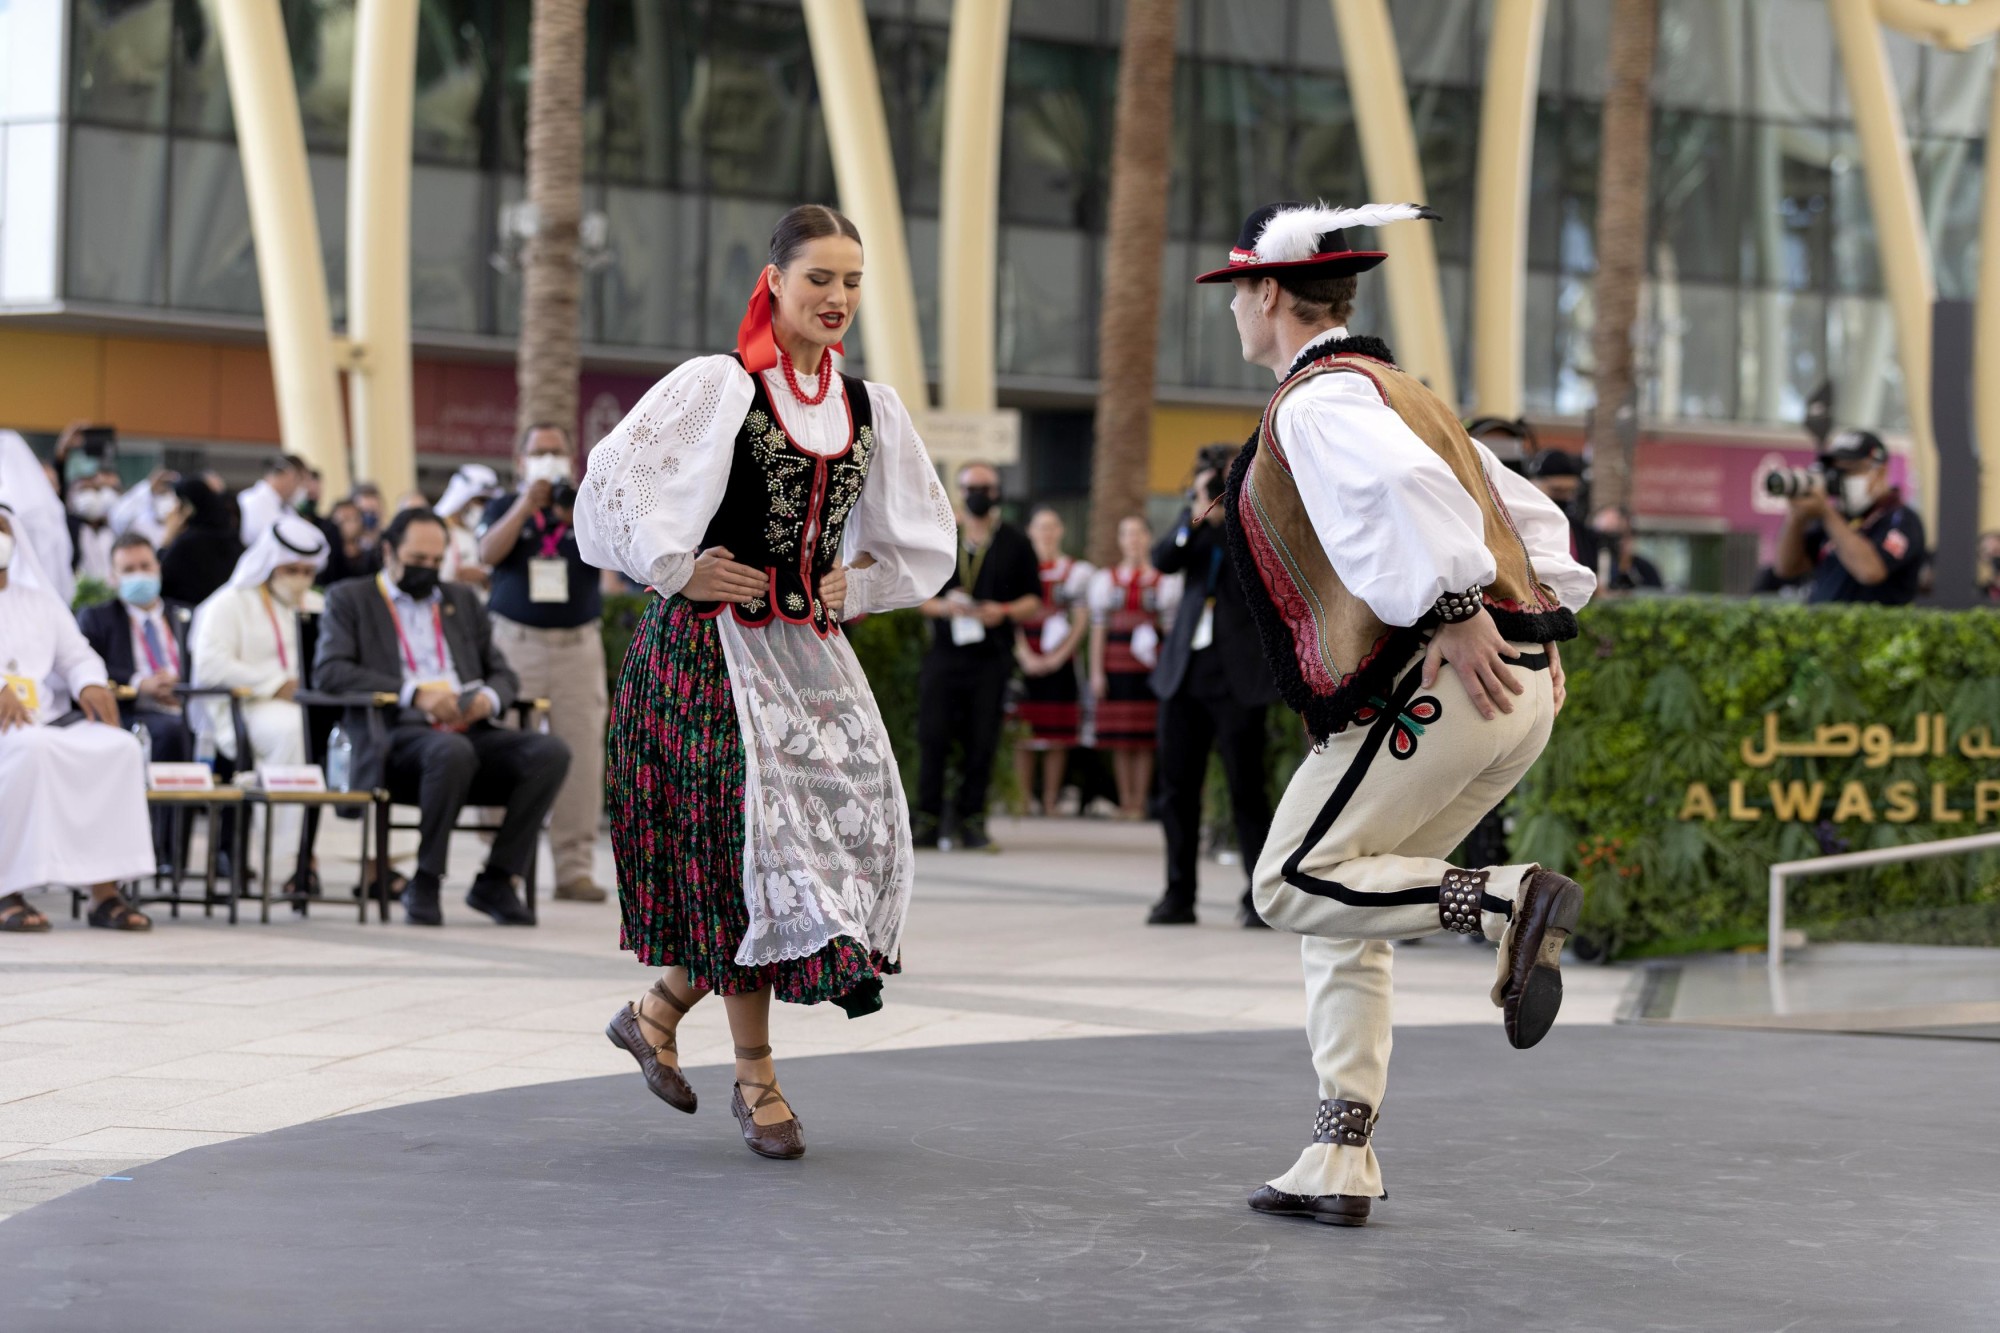 Cultural performers during the Slovakia National Day Ceremony at Al Wasl m38849